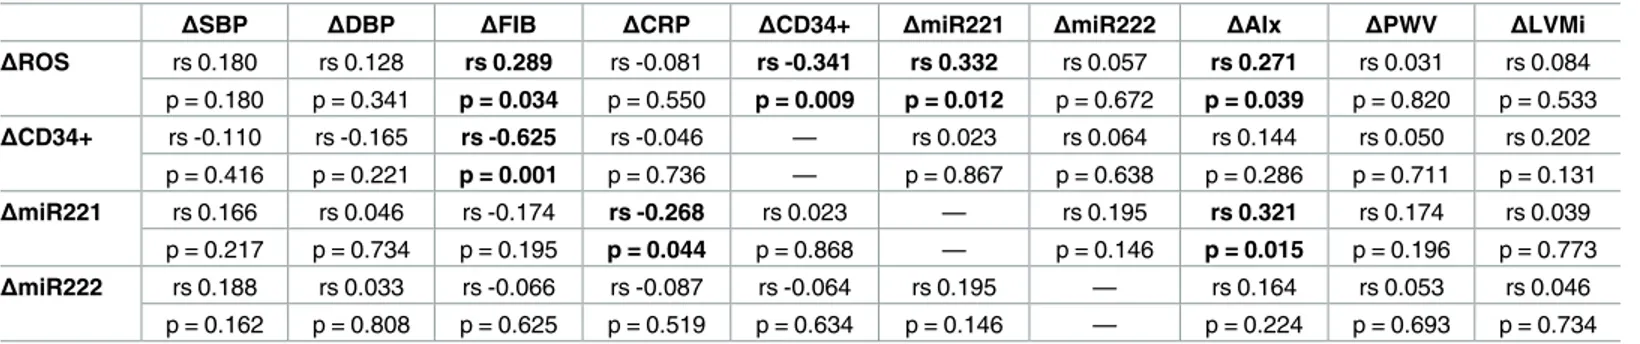 Table 3. Correlations among variables.